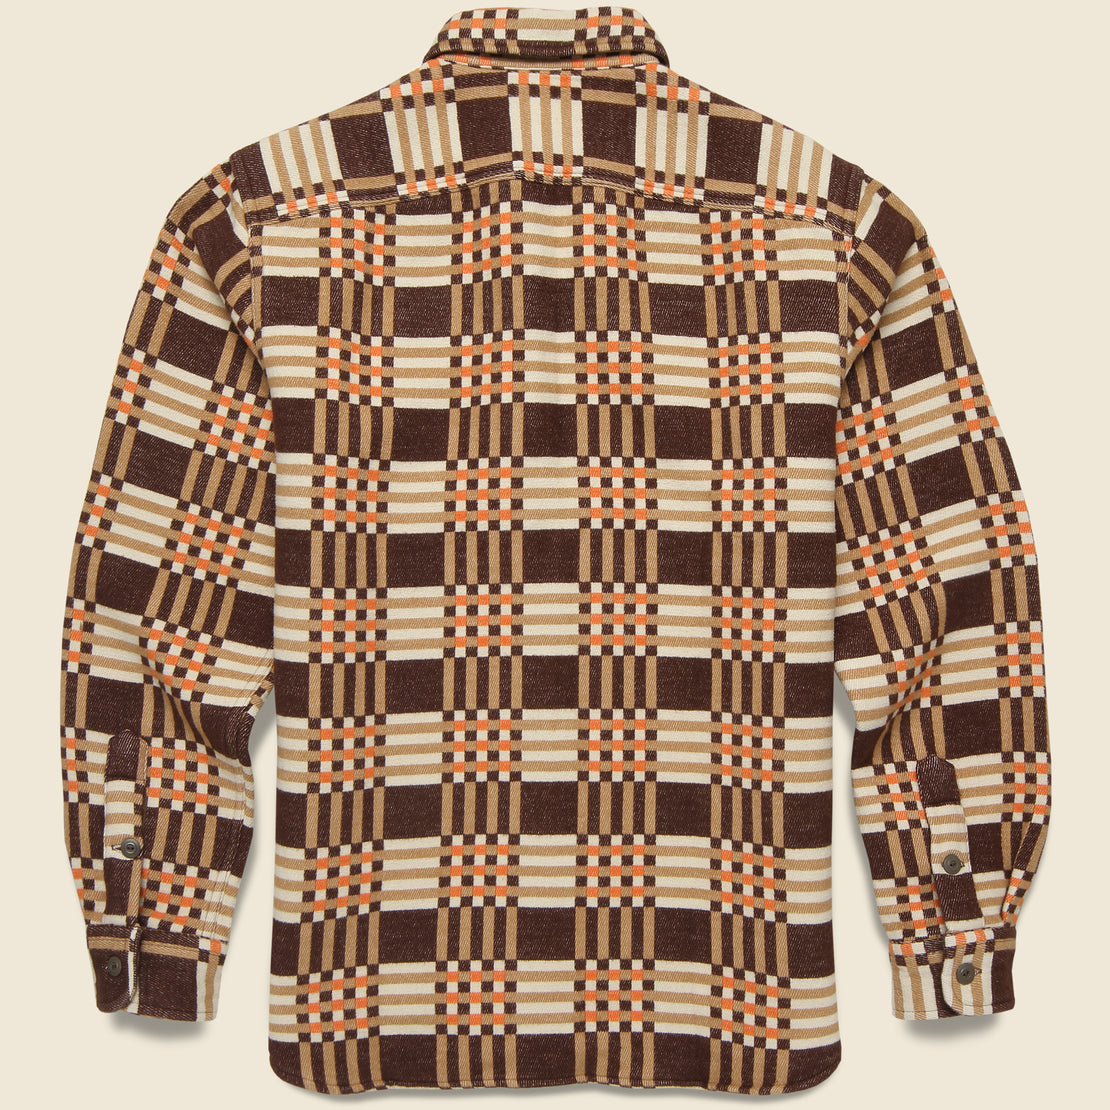 Cody Workshirt - Brown Multi - RRL - STAG Provisions - Tops - L/S Woven - Plaid